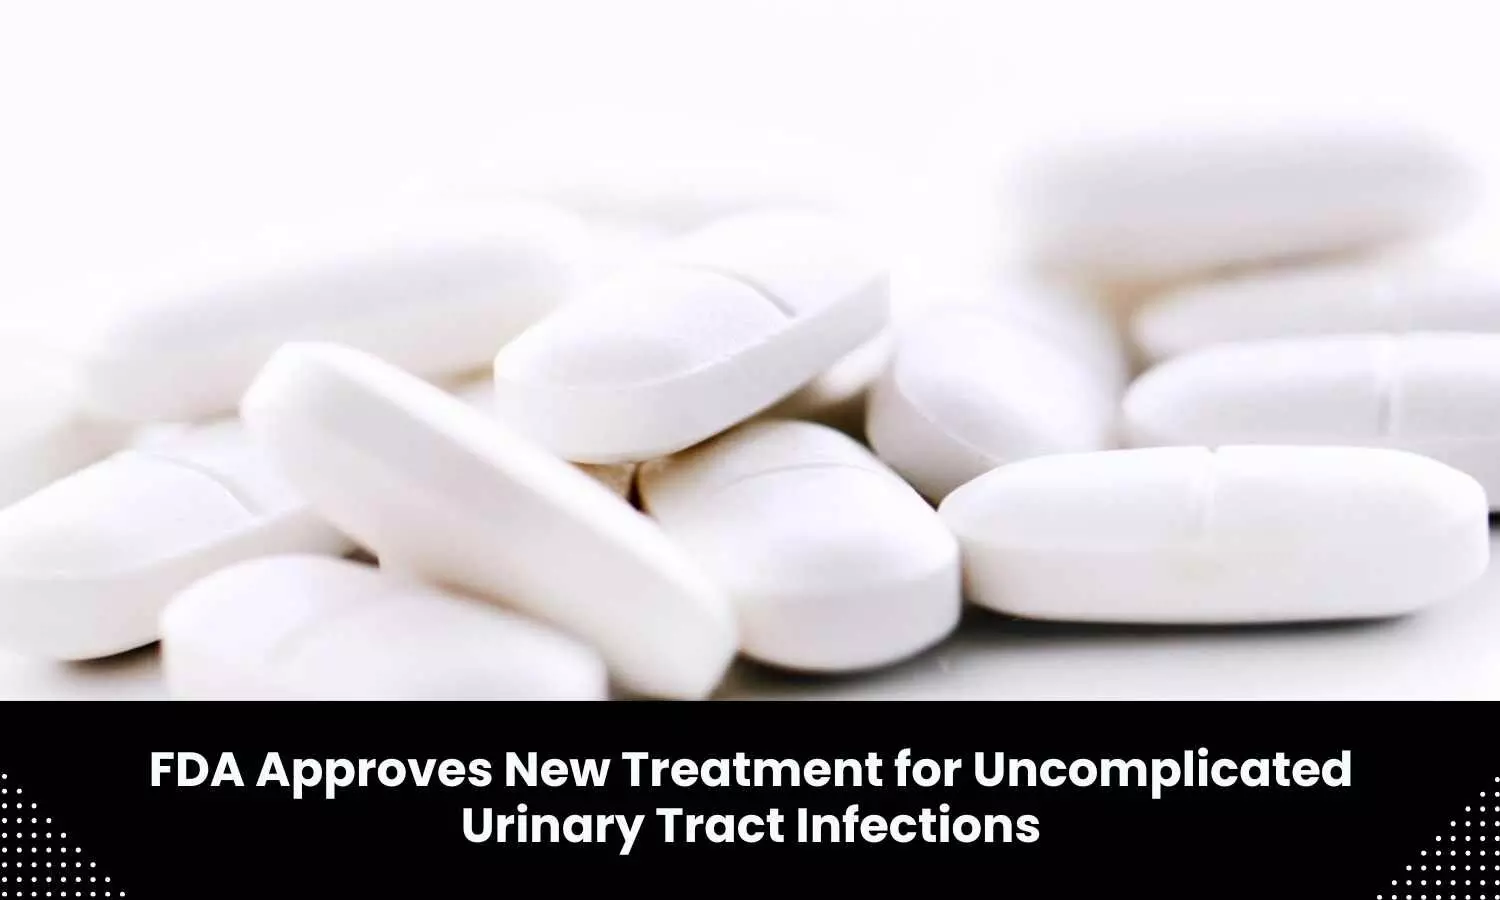 New treatment for Uncomplicated Urinary Tract Infections approved by FDA